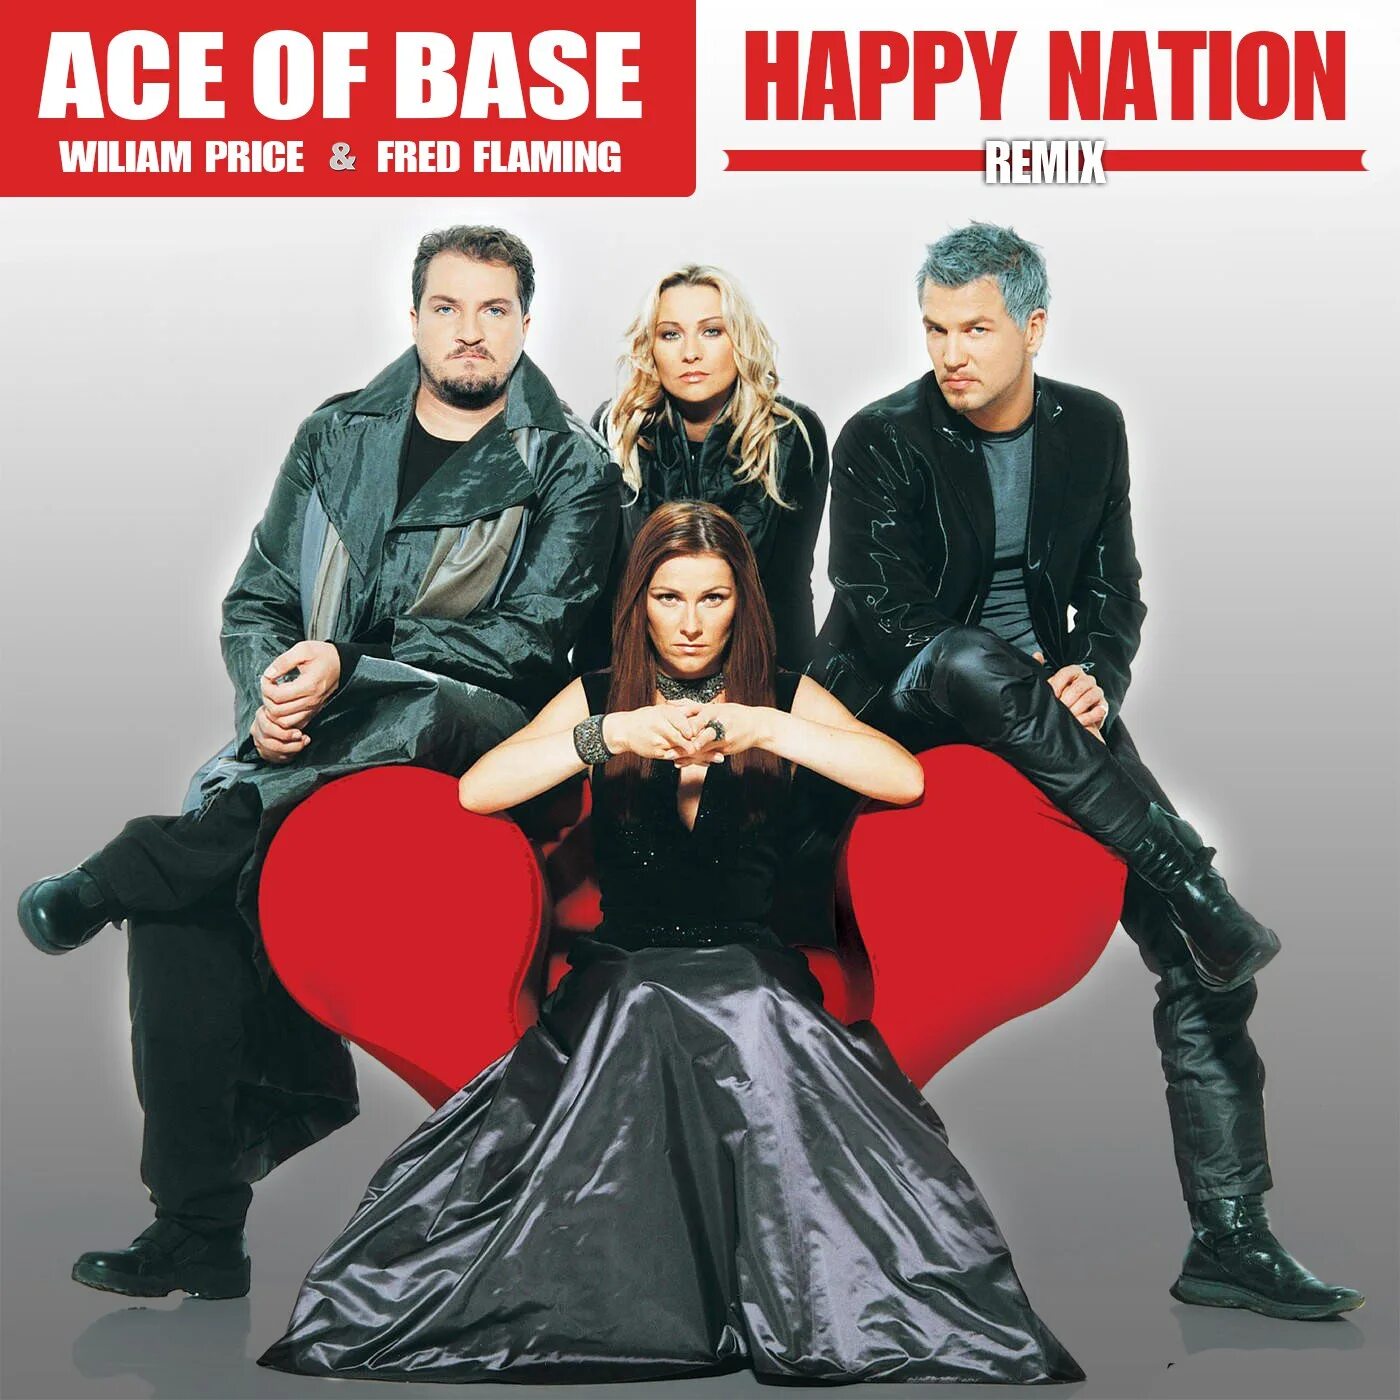 Ace of Base 1992. Ace of Base 2022. Ace of Base Happy Nation. Ace of Base Happy Fred Mykos.